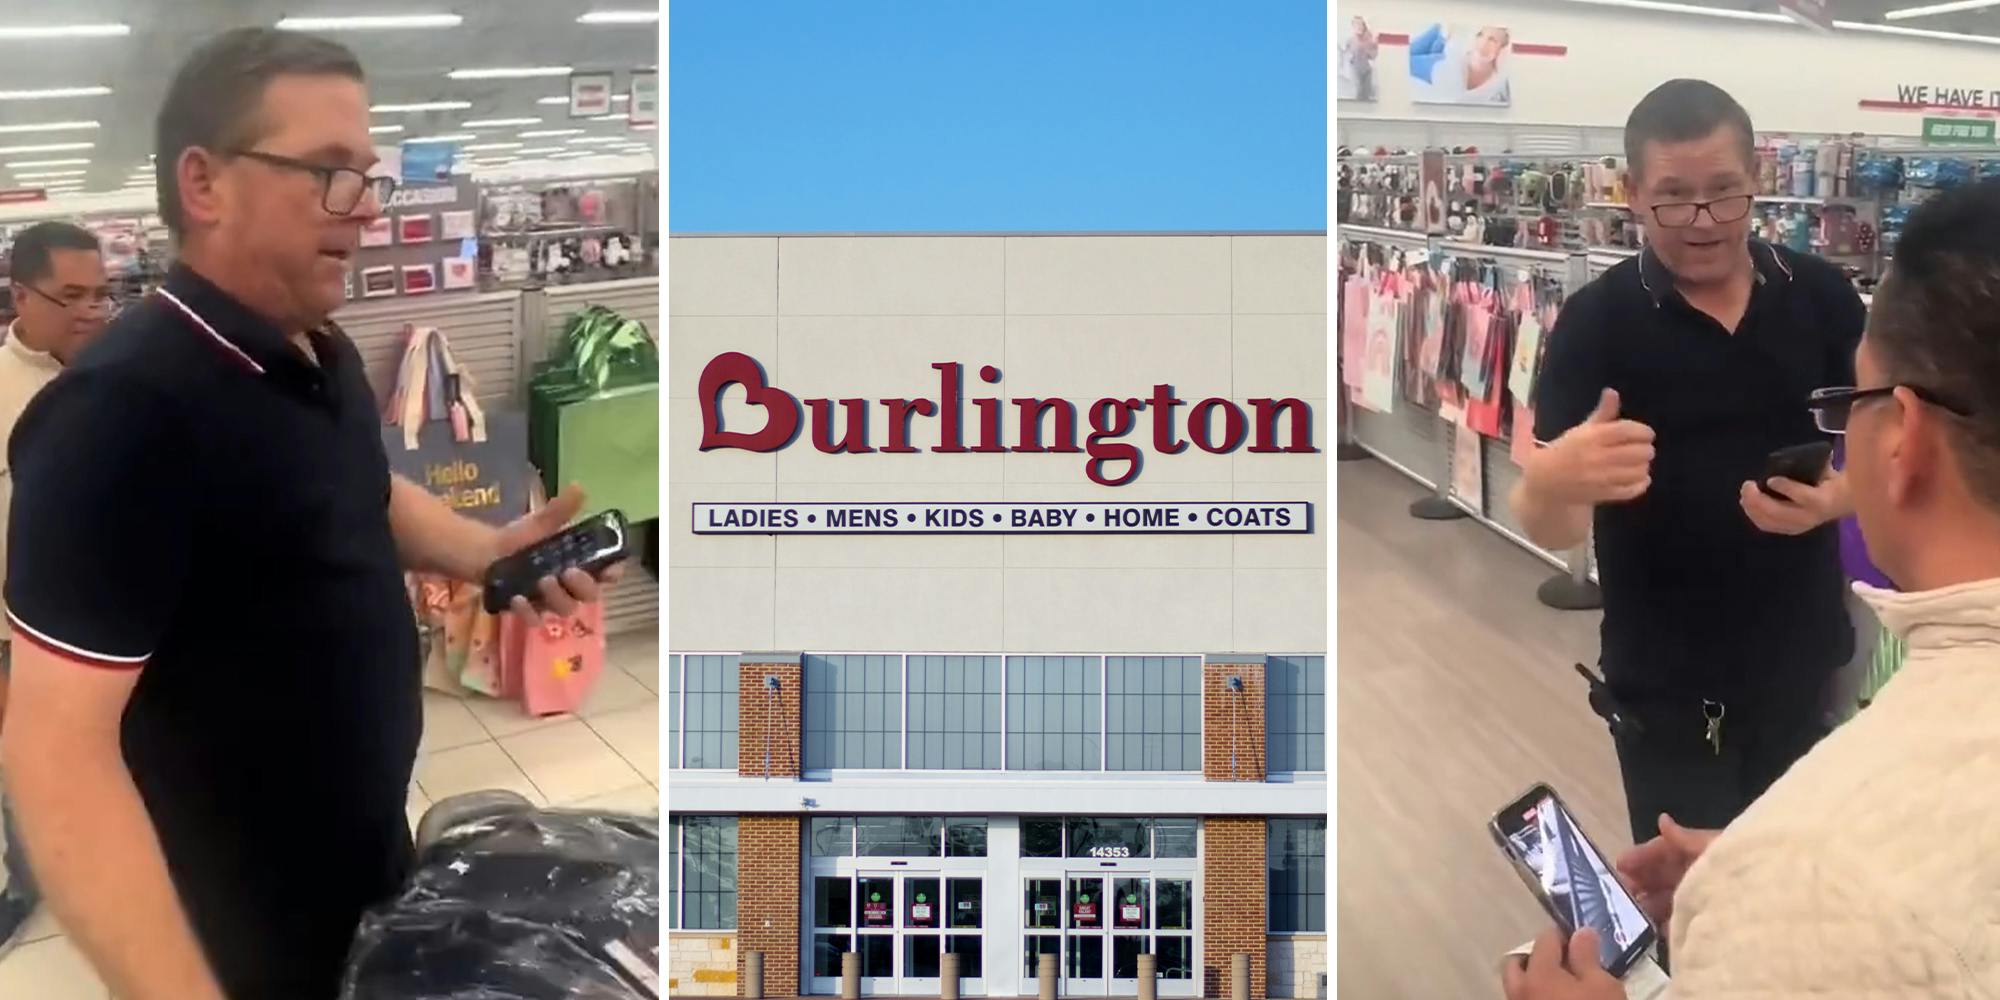 Burlington manager tries to force customer to leave without the items they paid for. It backfires